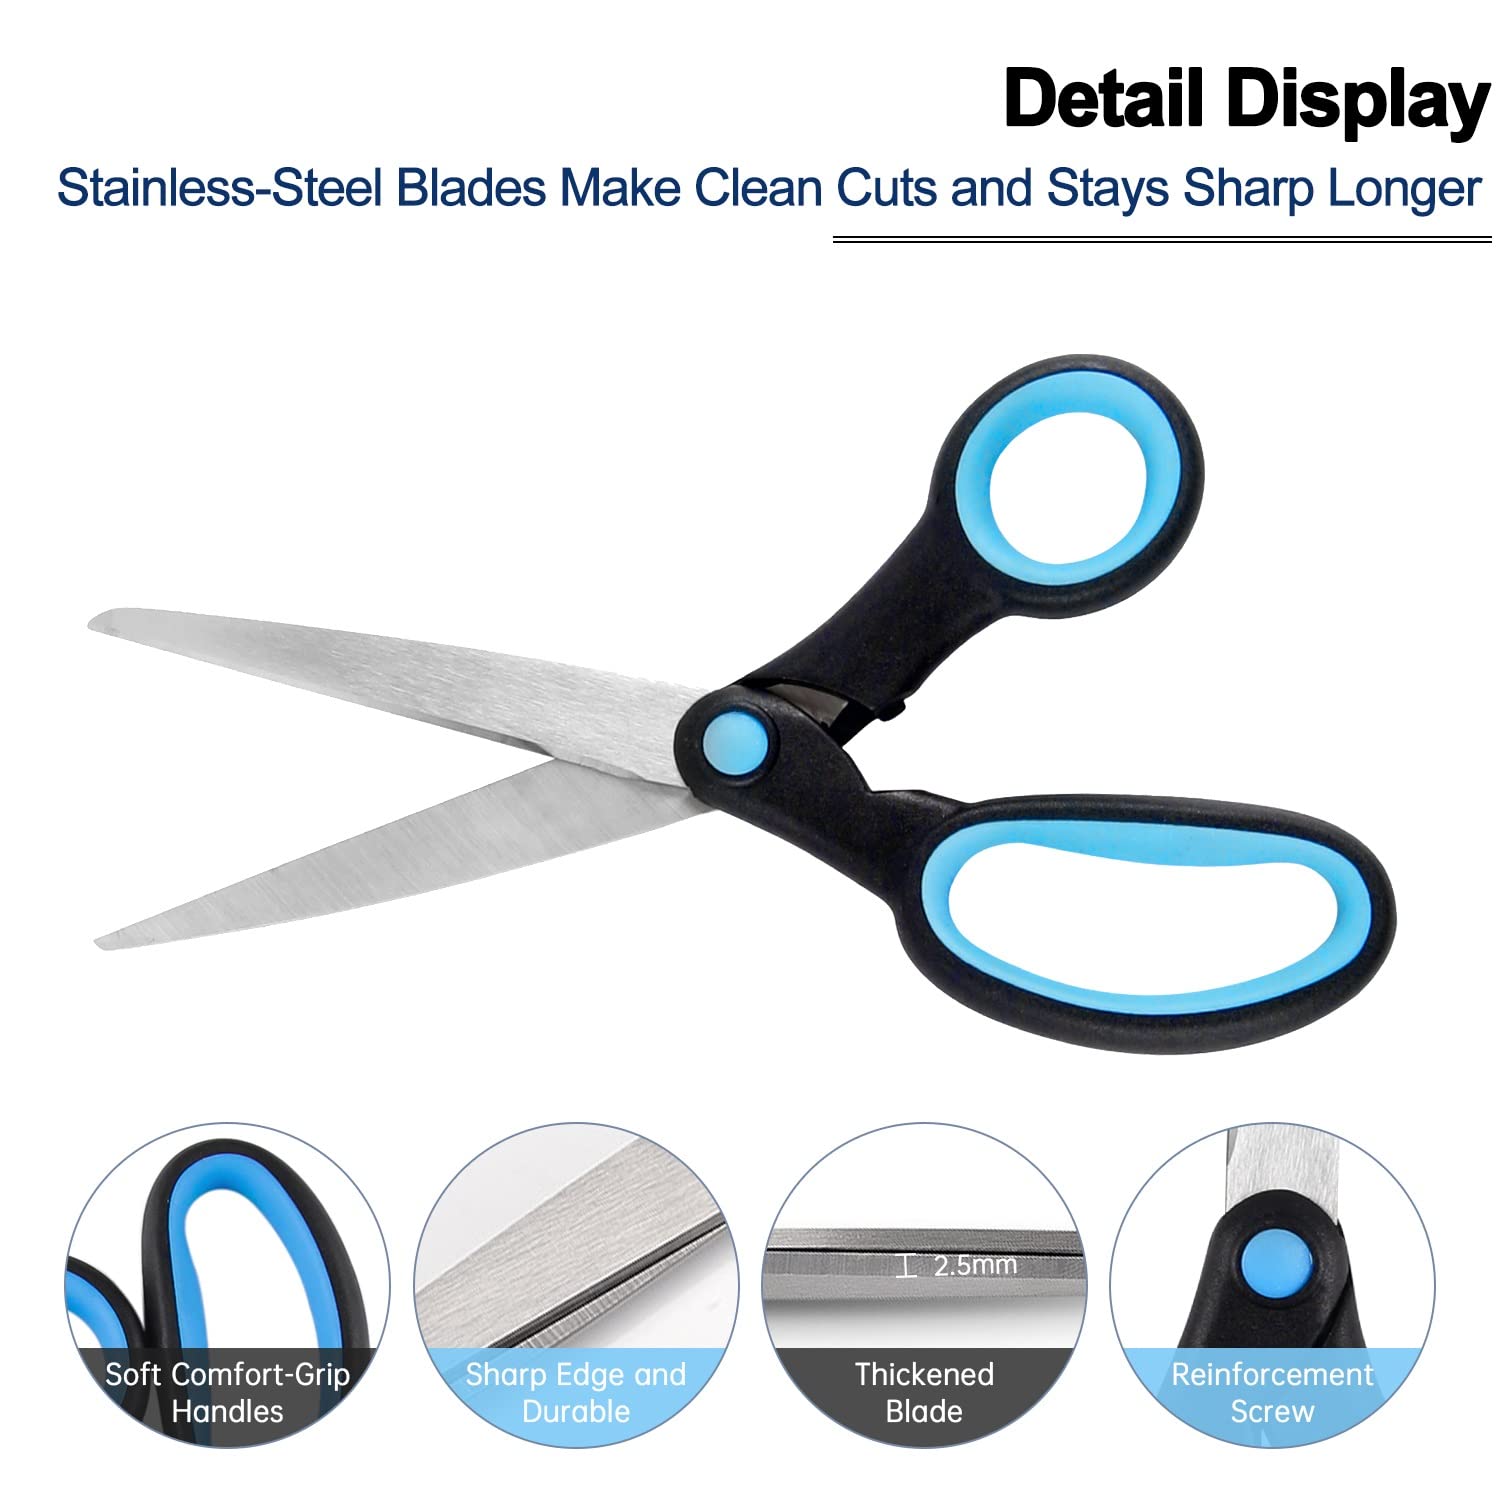 Great Choice Products Left Handed Scissors For Adults, 8 Inch Lefty Scissors Bluk For Kids Student, All Purpose Sharp Blades Shears Set Of 2 Pack, …